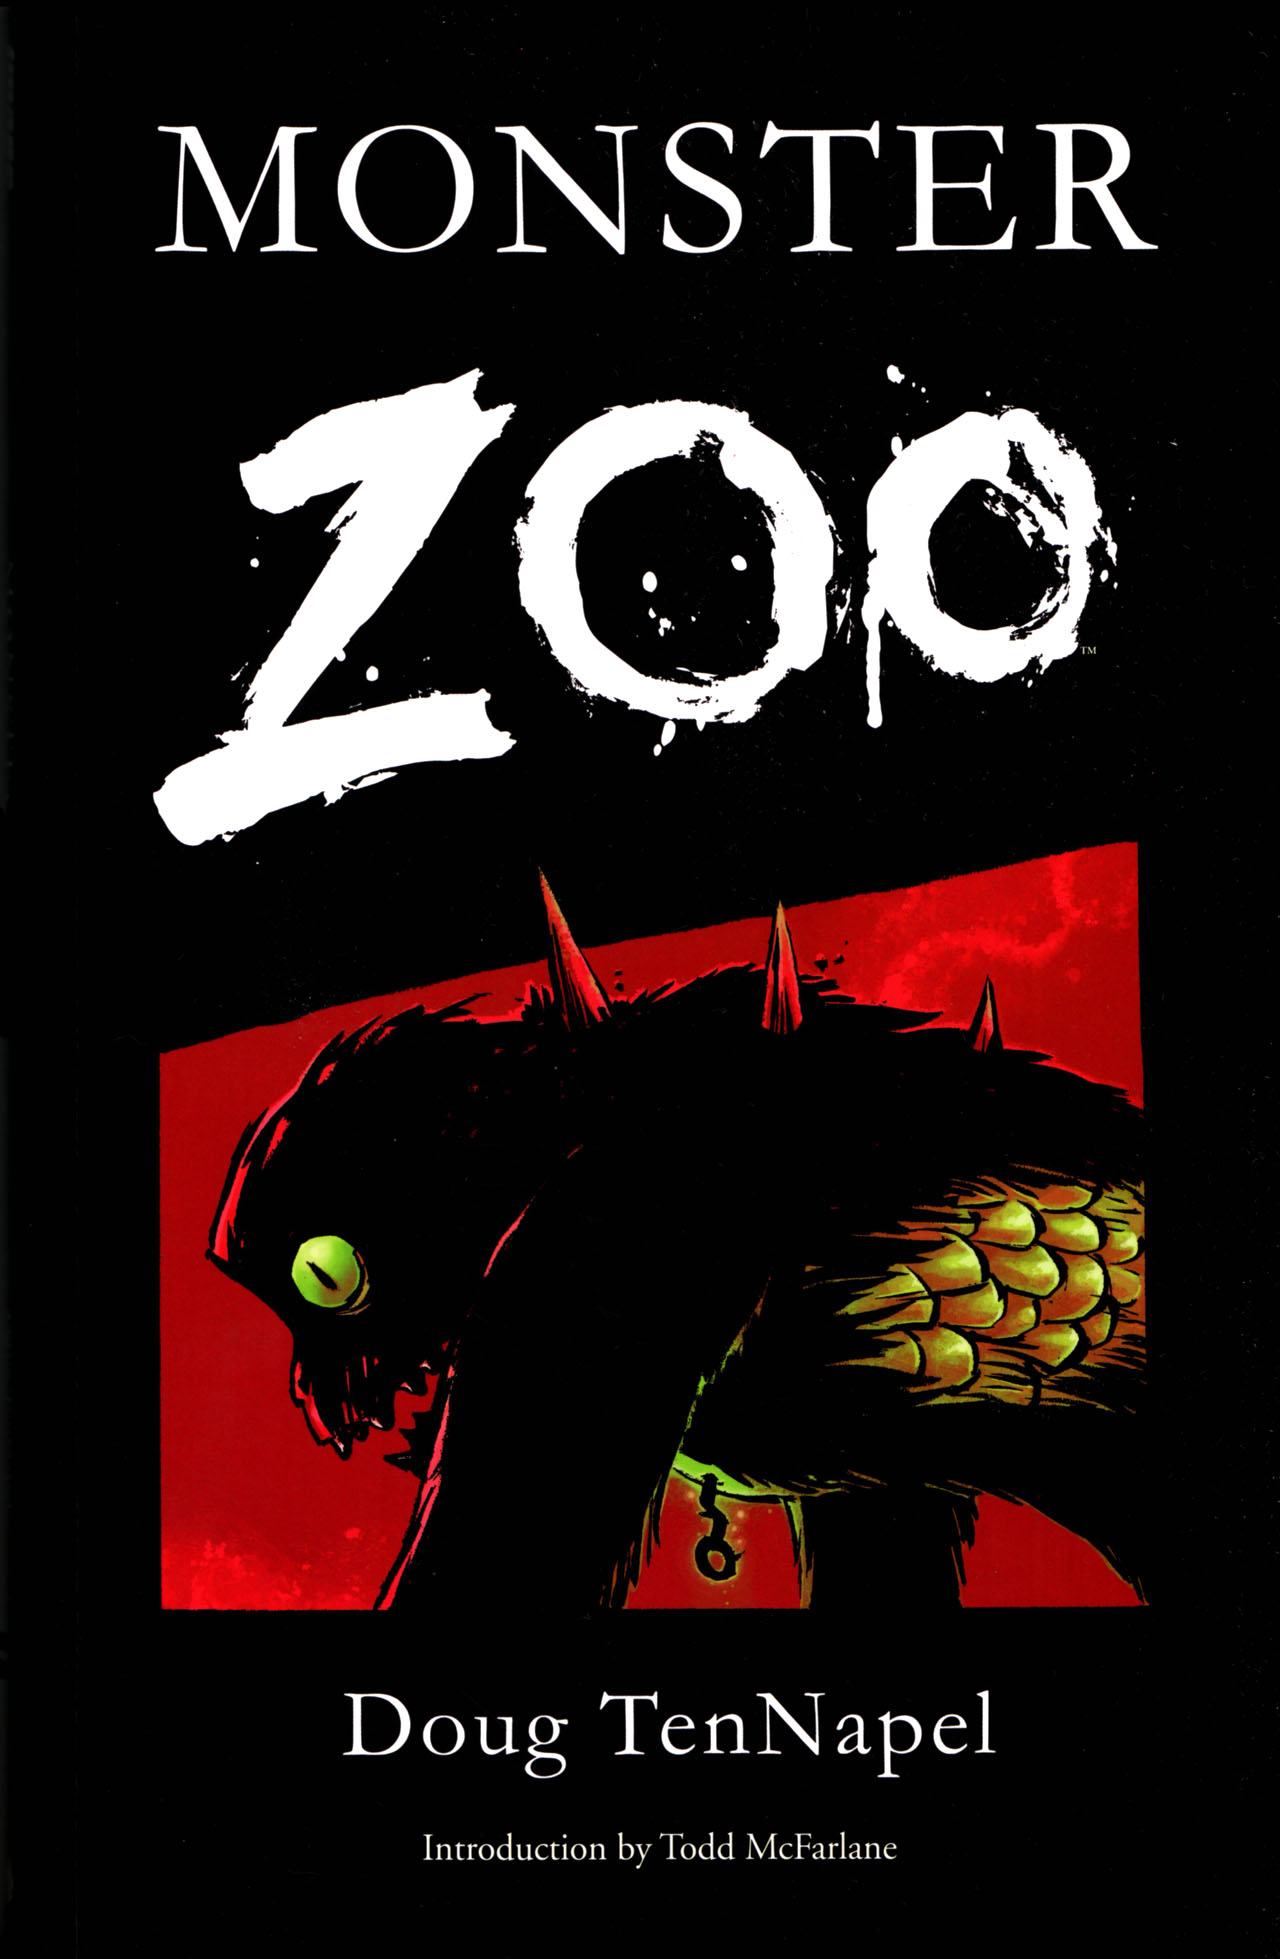 Read online Monster Zoo comic -  Issue # TPB - 1